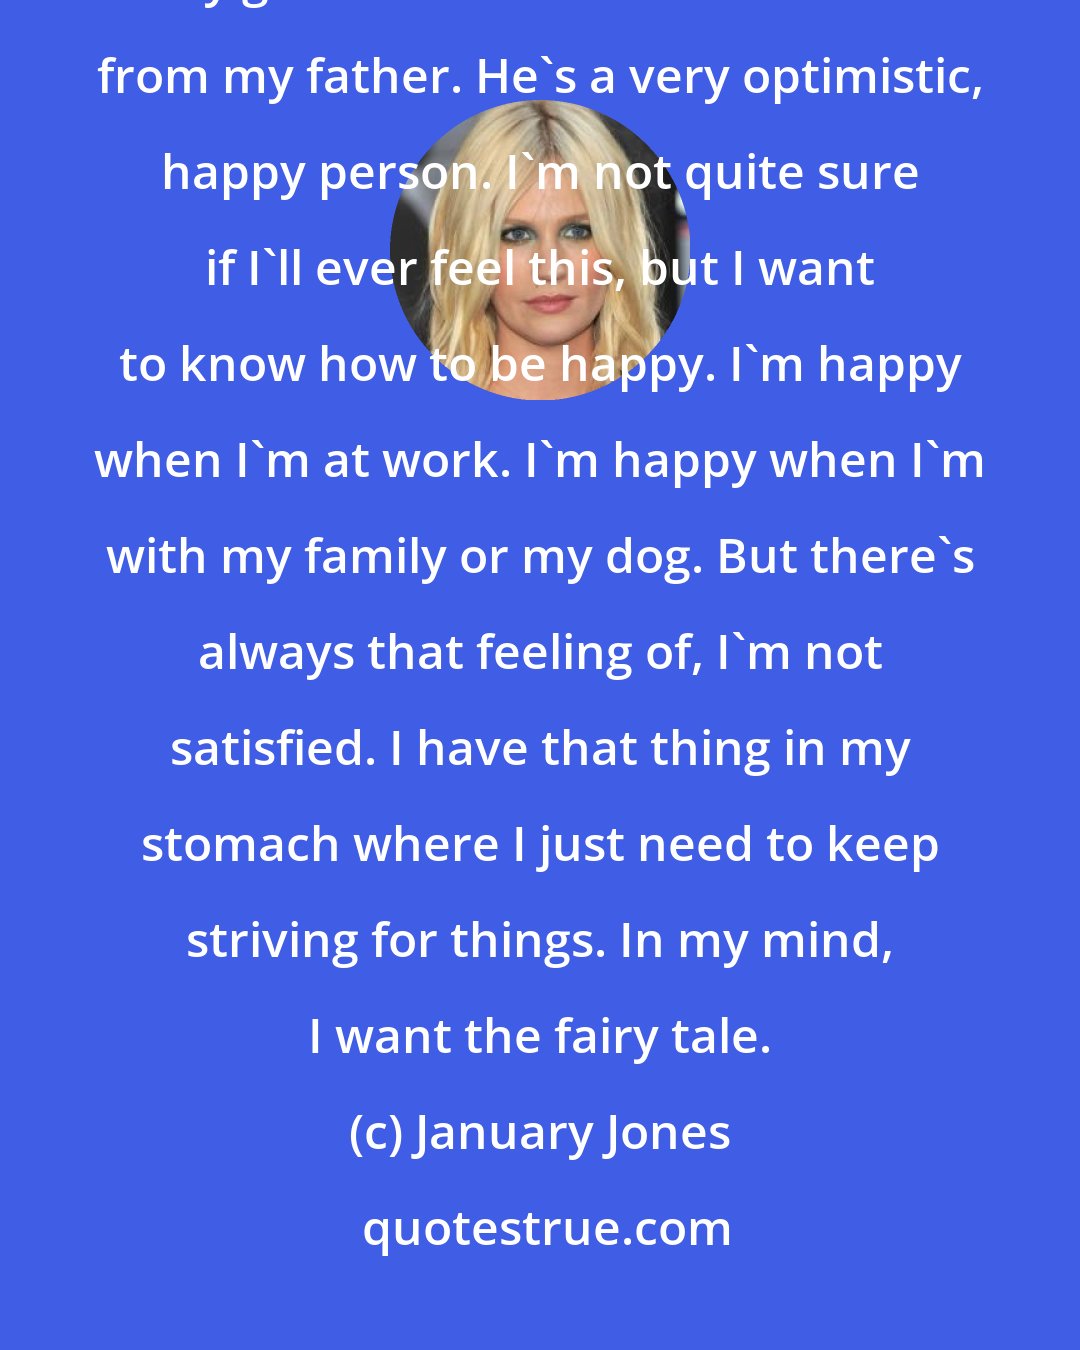 January Jones: Success for me is to feel happy - 80 percent of the time. That's been my goal in life. I think that comes from my father. He's a very optimistic, happy person. I'm not quite sure if I'll ever feel this, but I want to know how to be happy. I'm happy when I'm at work. I'm happy when I'm with my family or my dog. But there's always that feeling of, I'm not satisfied. I have that thing in my stomach where I just need to keep striving for things. In my mind, I want the fairy tale.